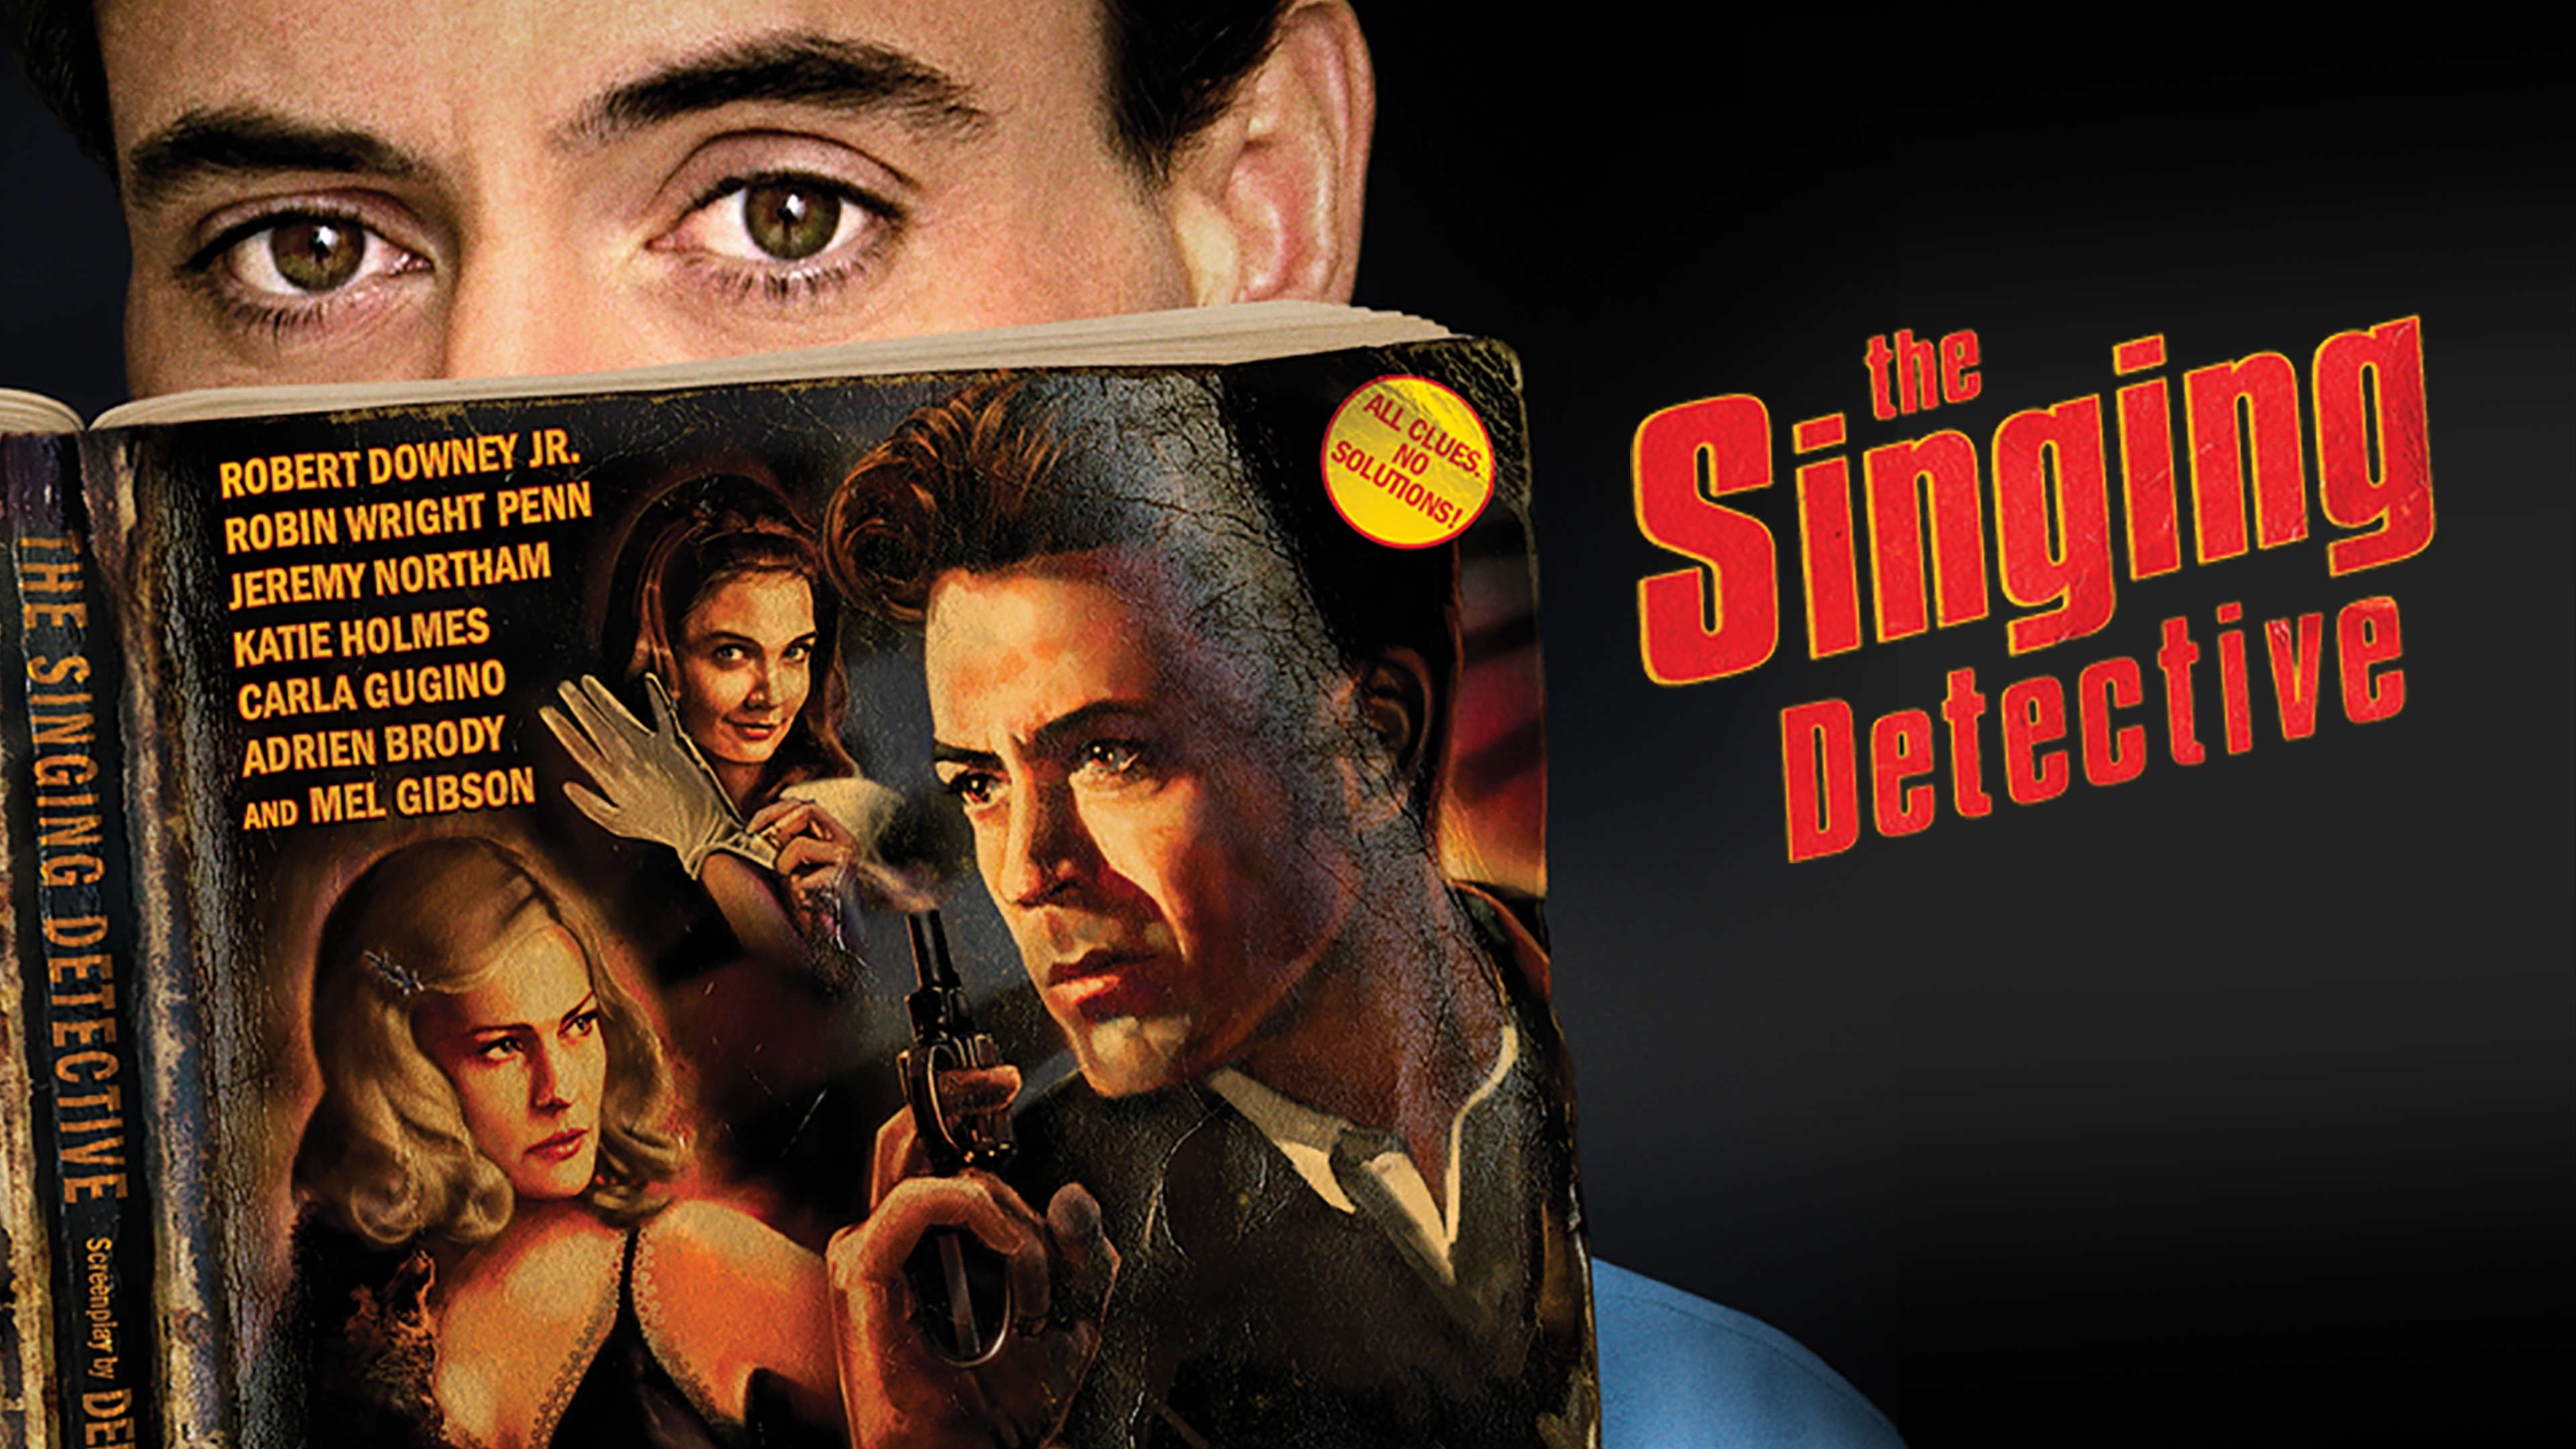 The Singing Detective (2003) - Movie - Where To Watch